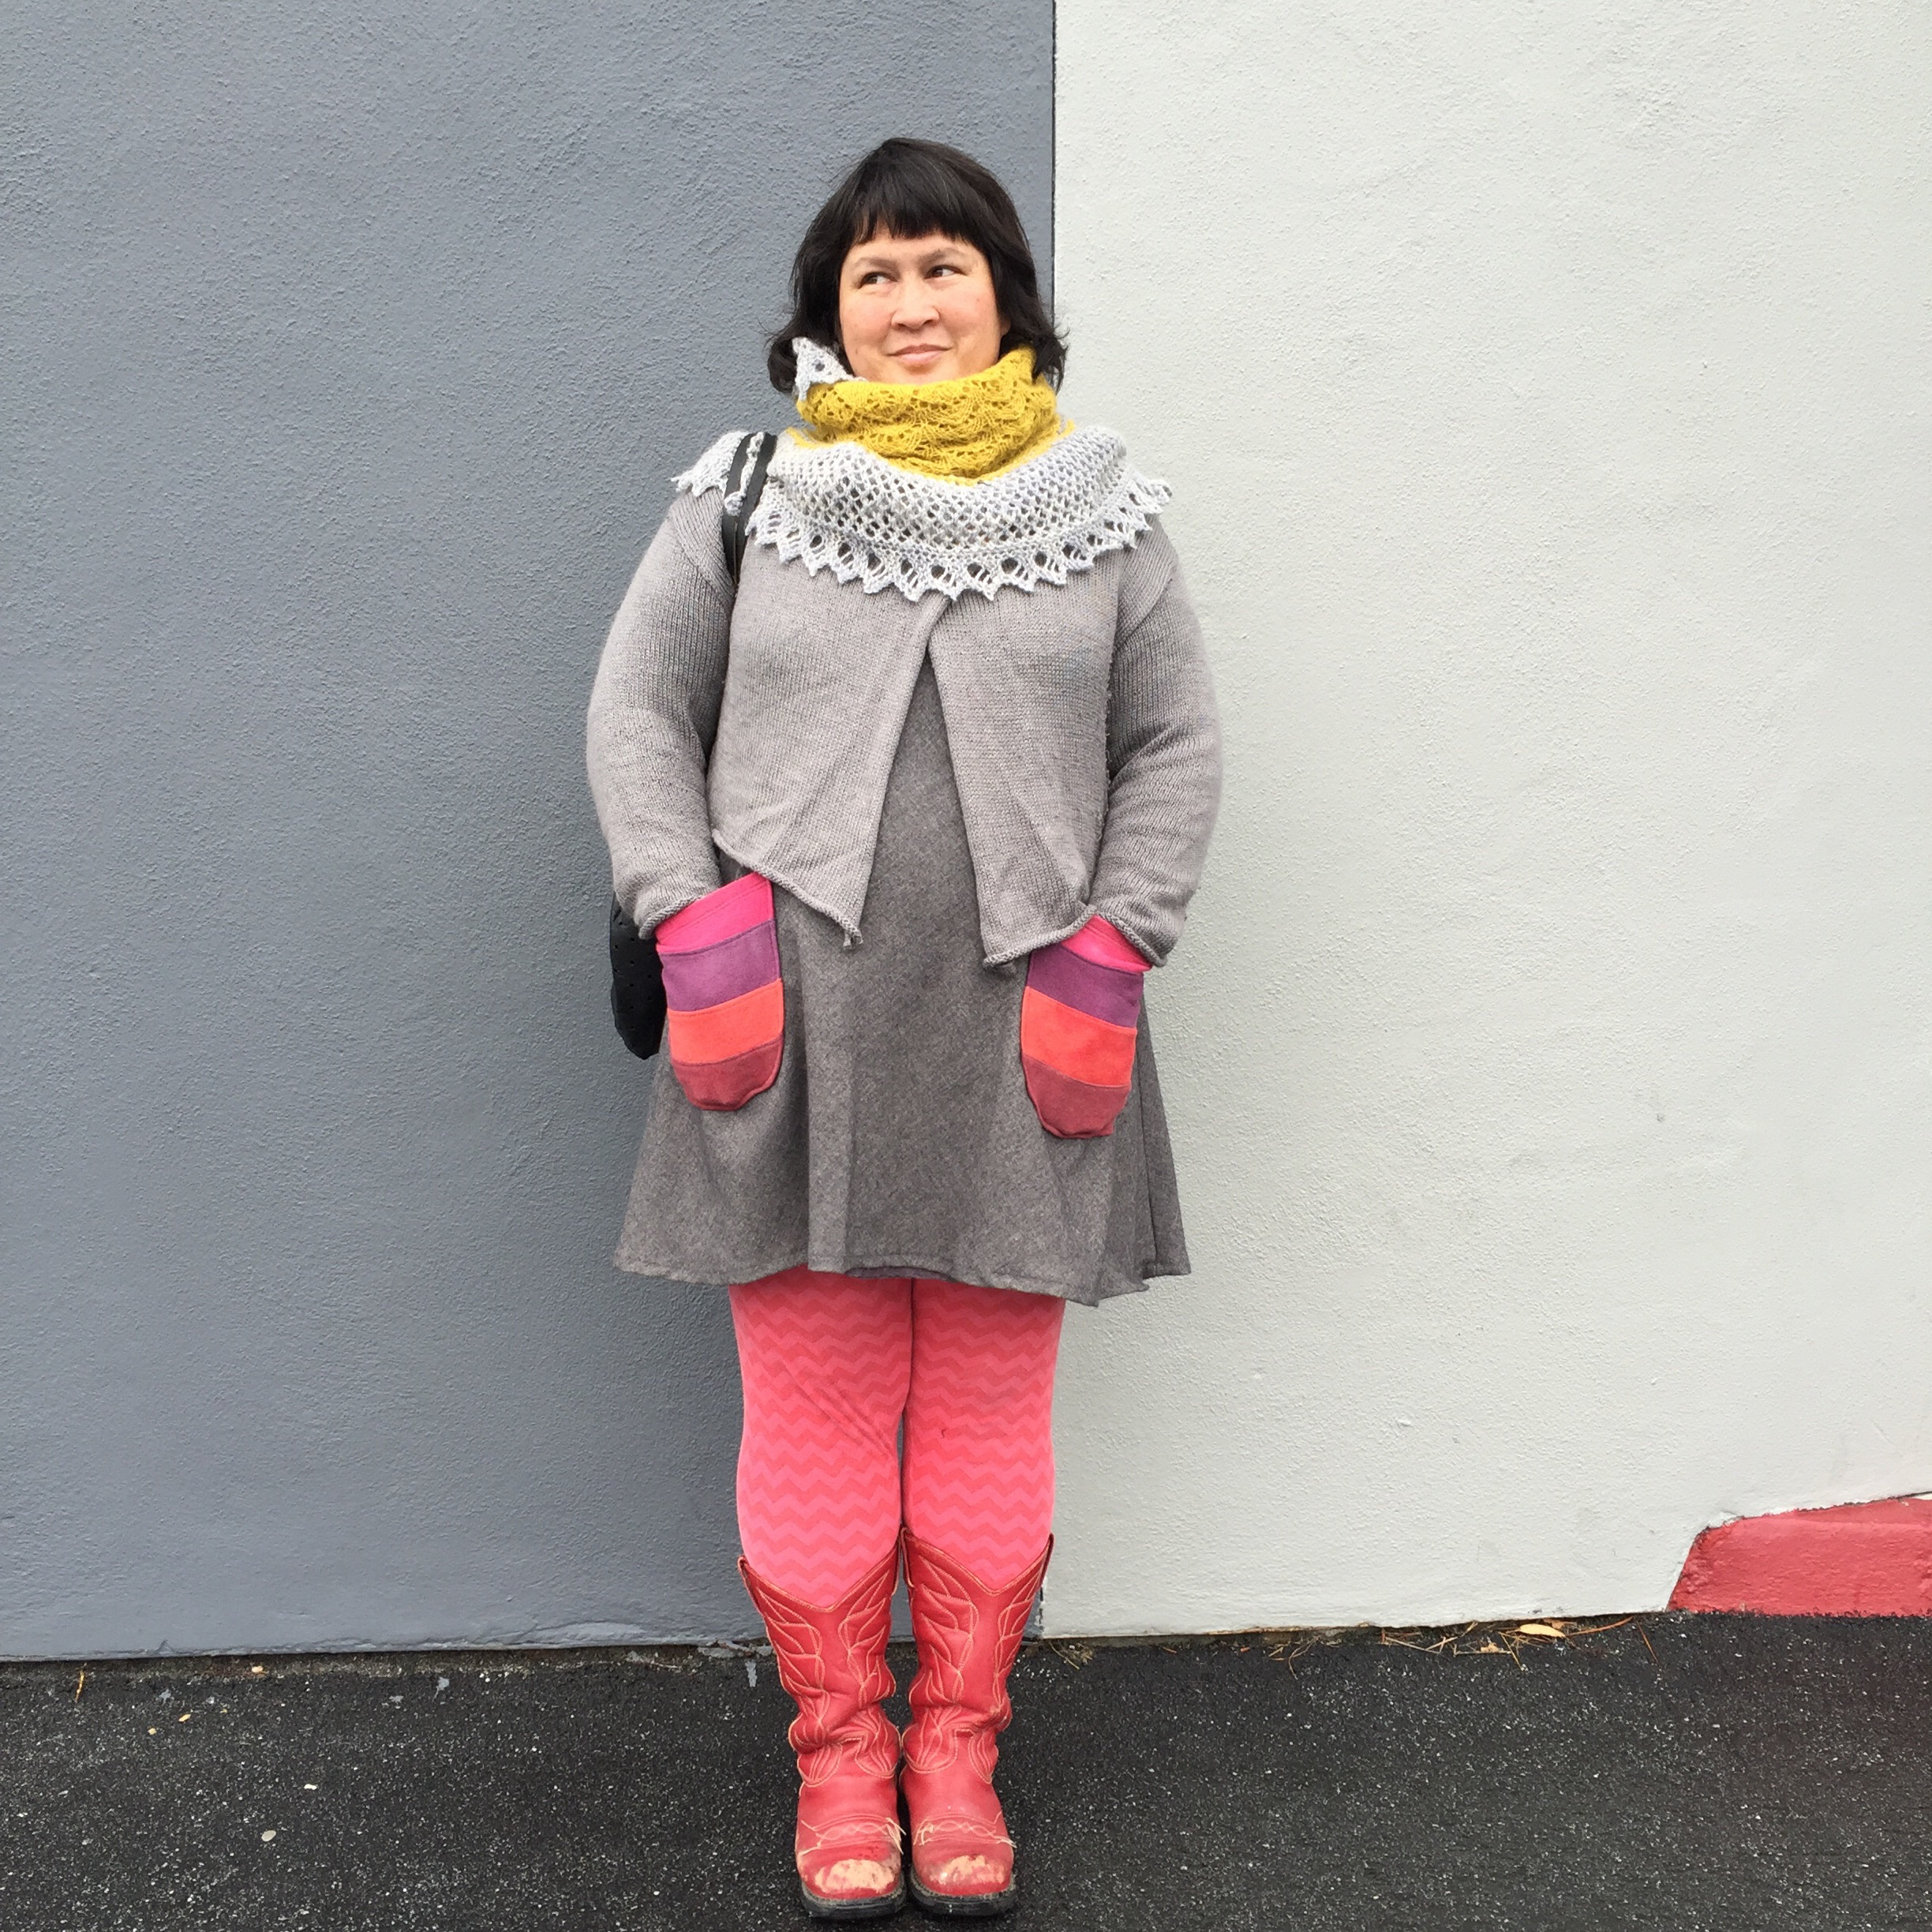 Sonyaphilip: Color + Gray edition of #handmadewardrobechronicles Liz Christie shawl by @throughtheloops; cardigan (own design); #100actsofsewing Dress no. 1 in lined wool with naturally dyed wool pockets by @avfkw; leggings (own pattern); and Fluevog boots